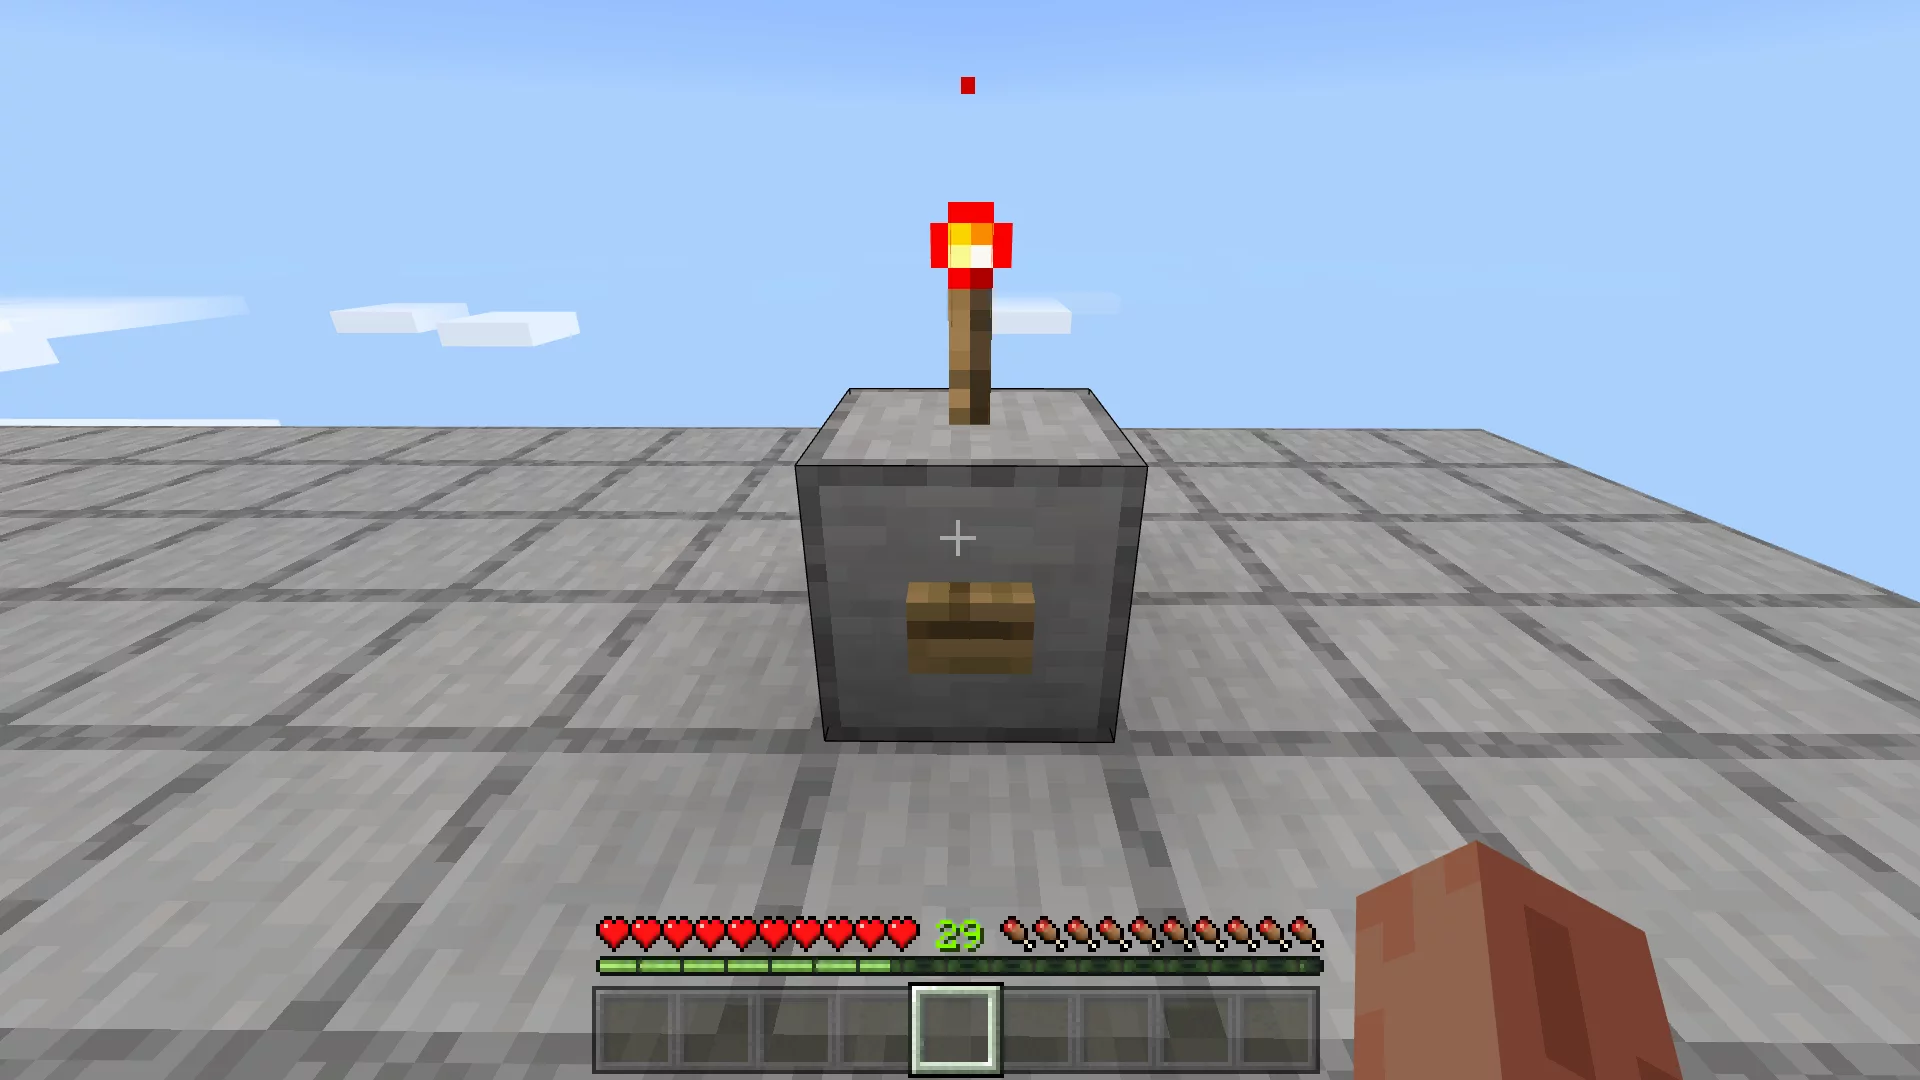 How To Turn Off Redstone Torches In Minecraft